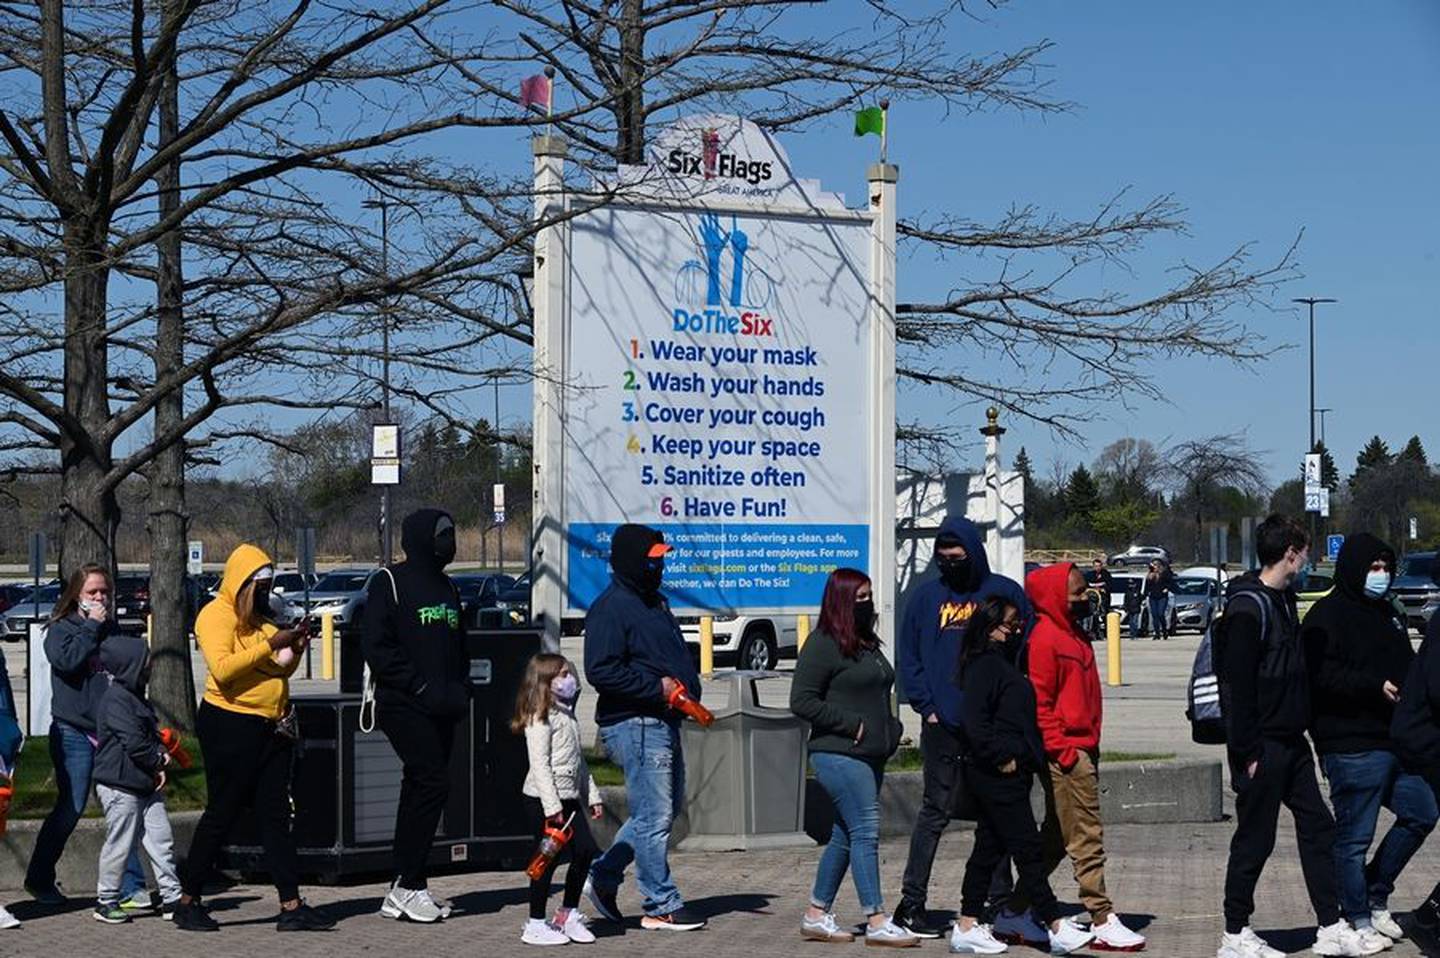 Visitors line up to enter Six Flags Great America last year. The Gurnee park was inactive in 2020 due to the COVID-19 pandemic but now is back on track to have a normal season.